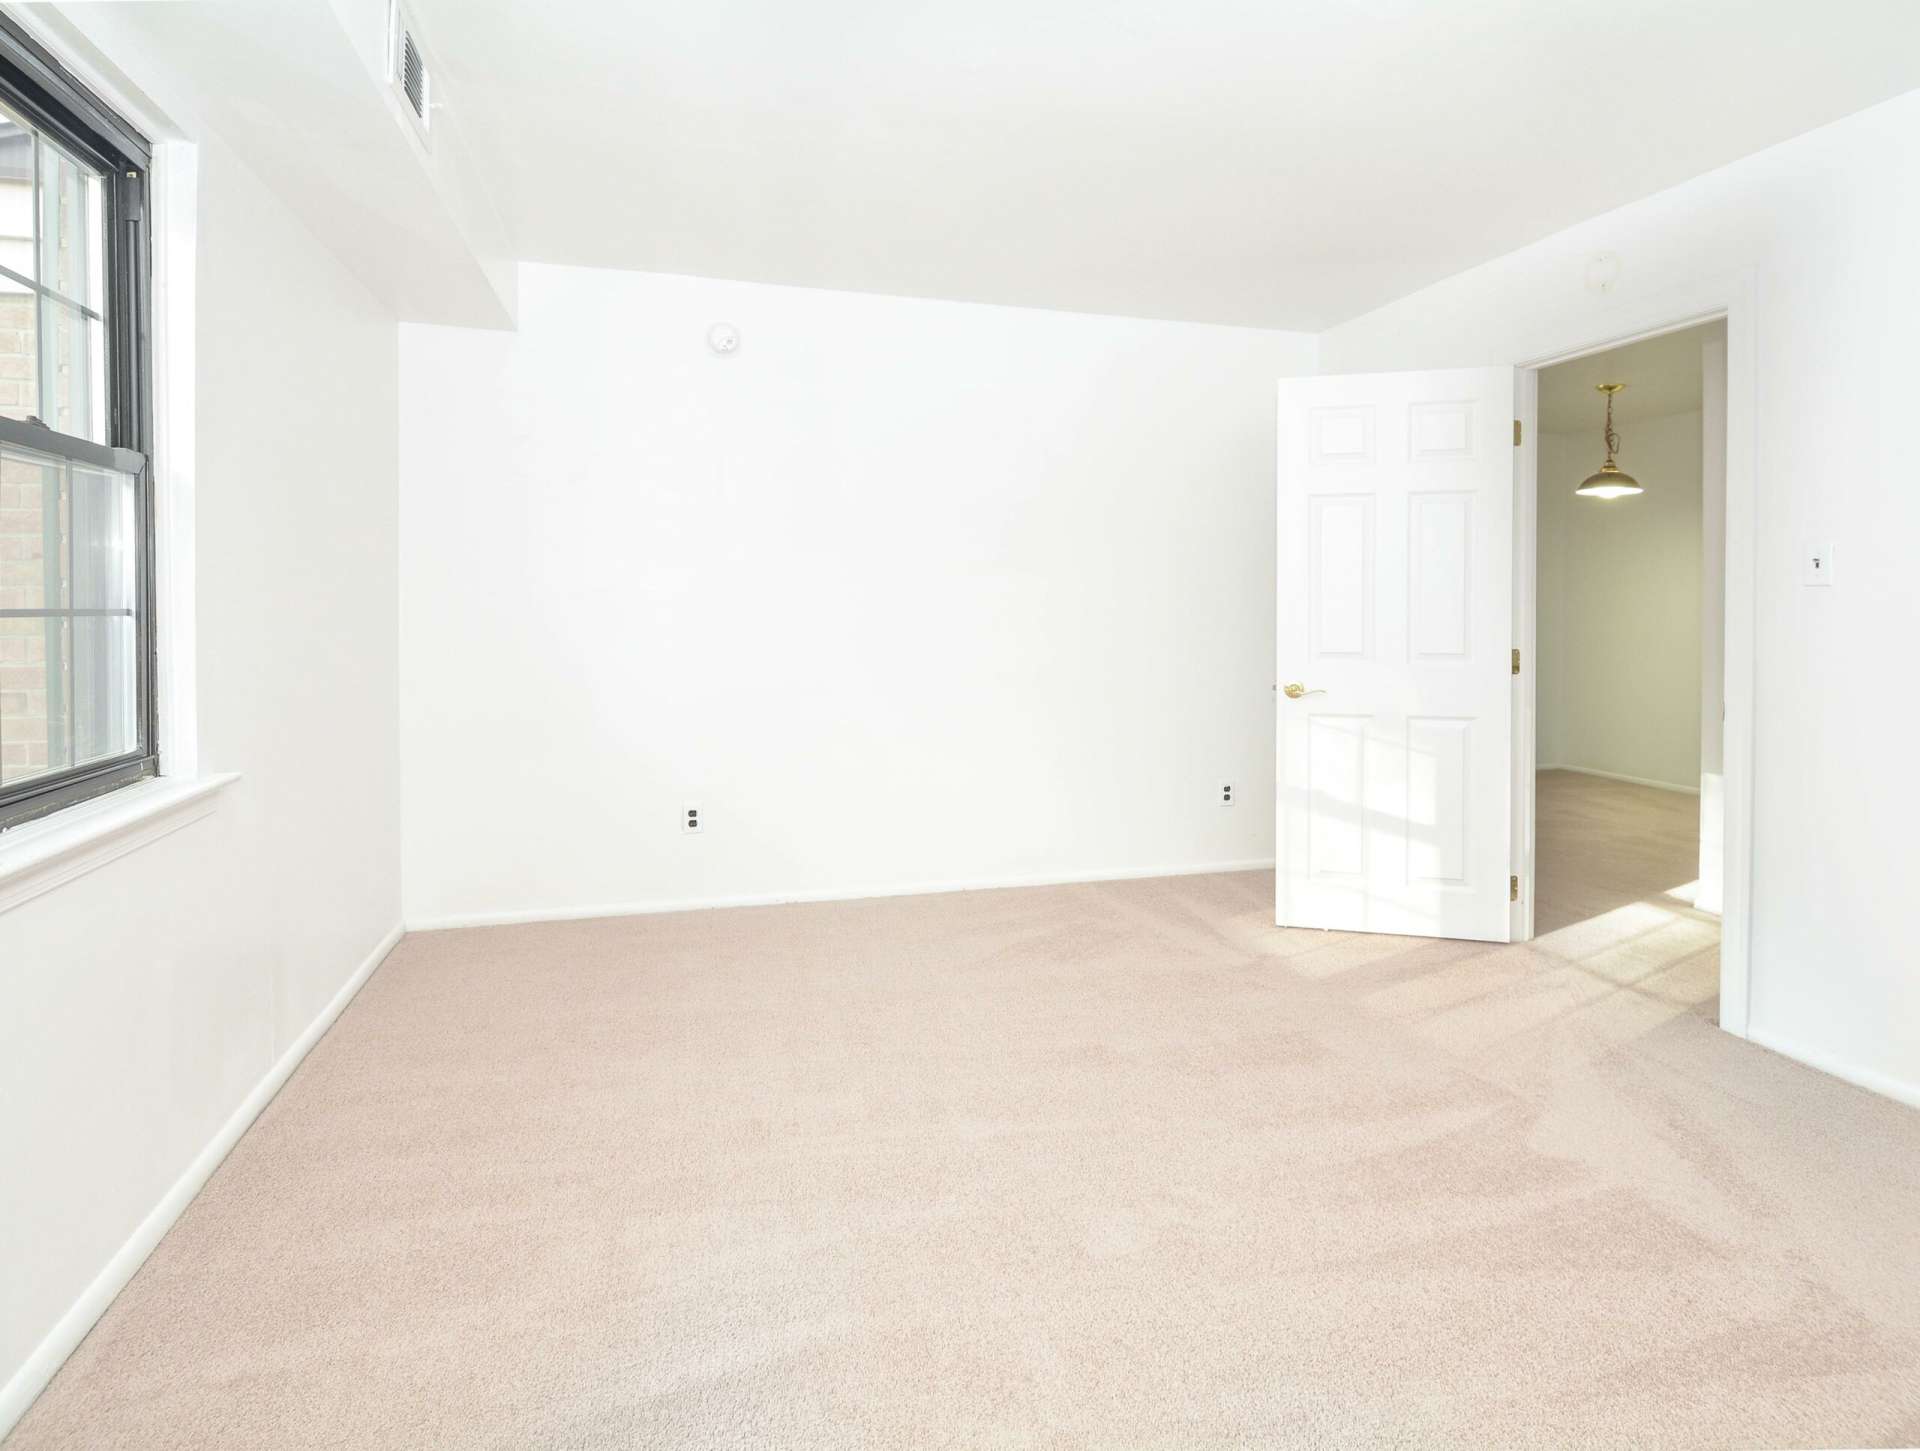 Spacious and carpeted bedroom with white walls and a window.